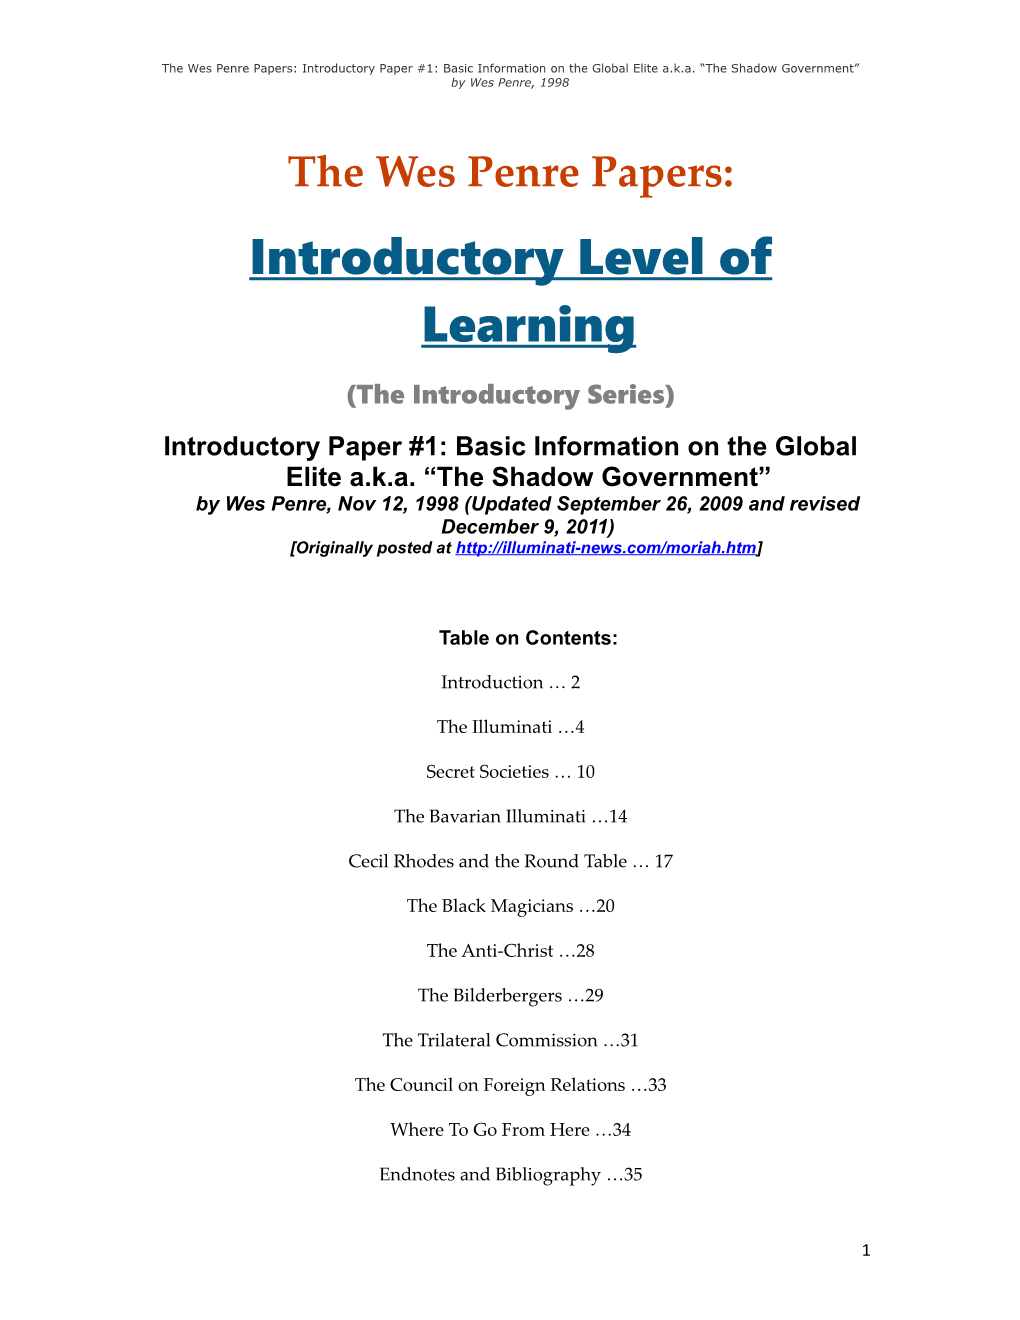 Introductory Level of Learning